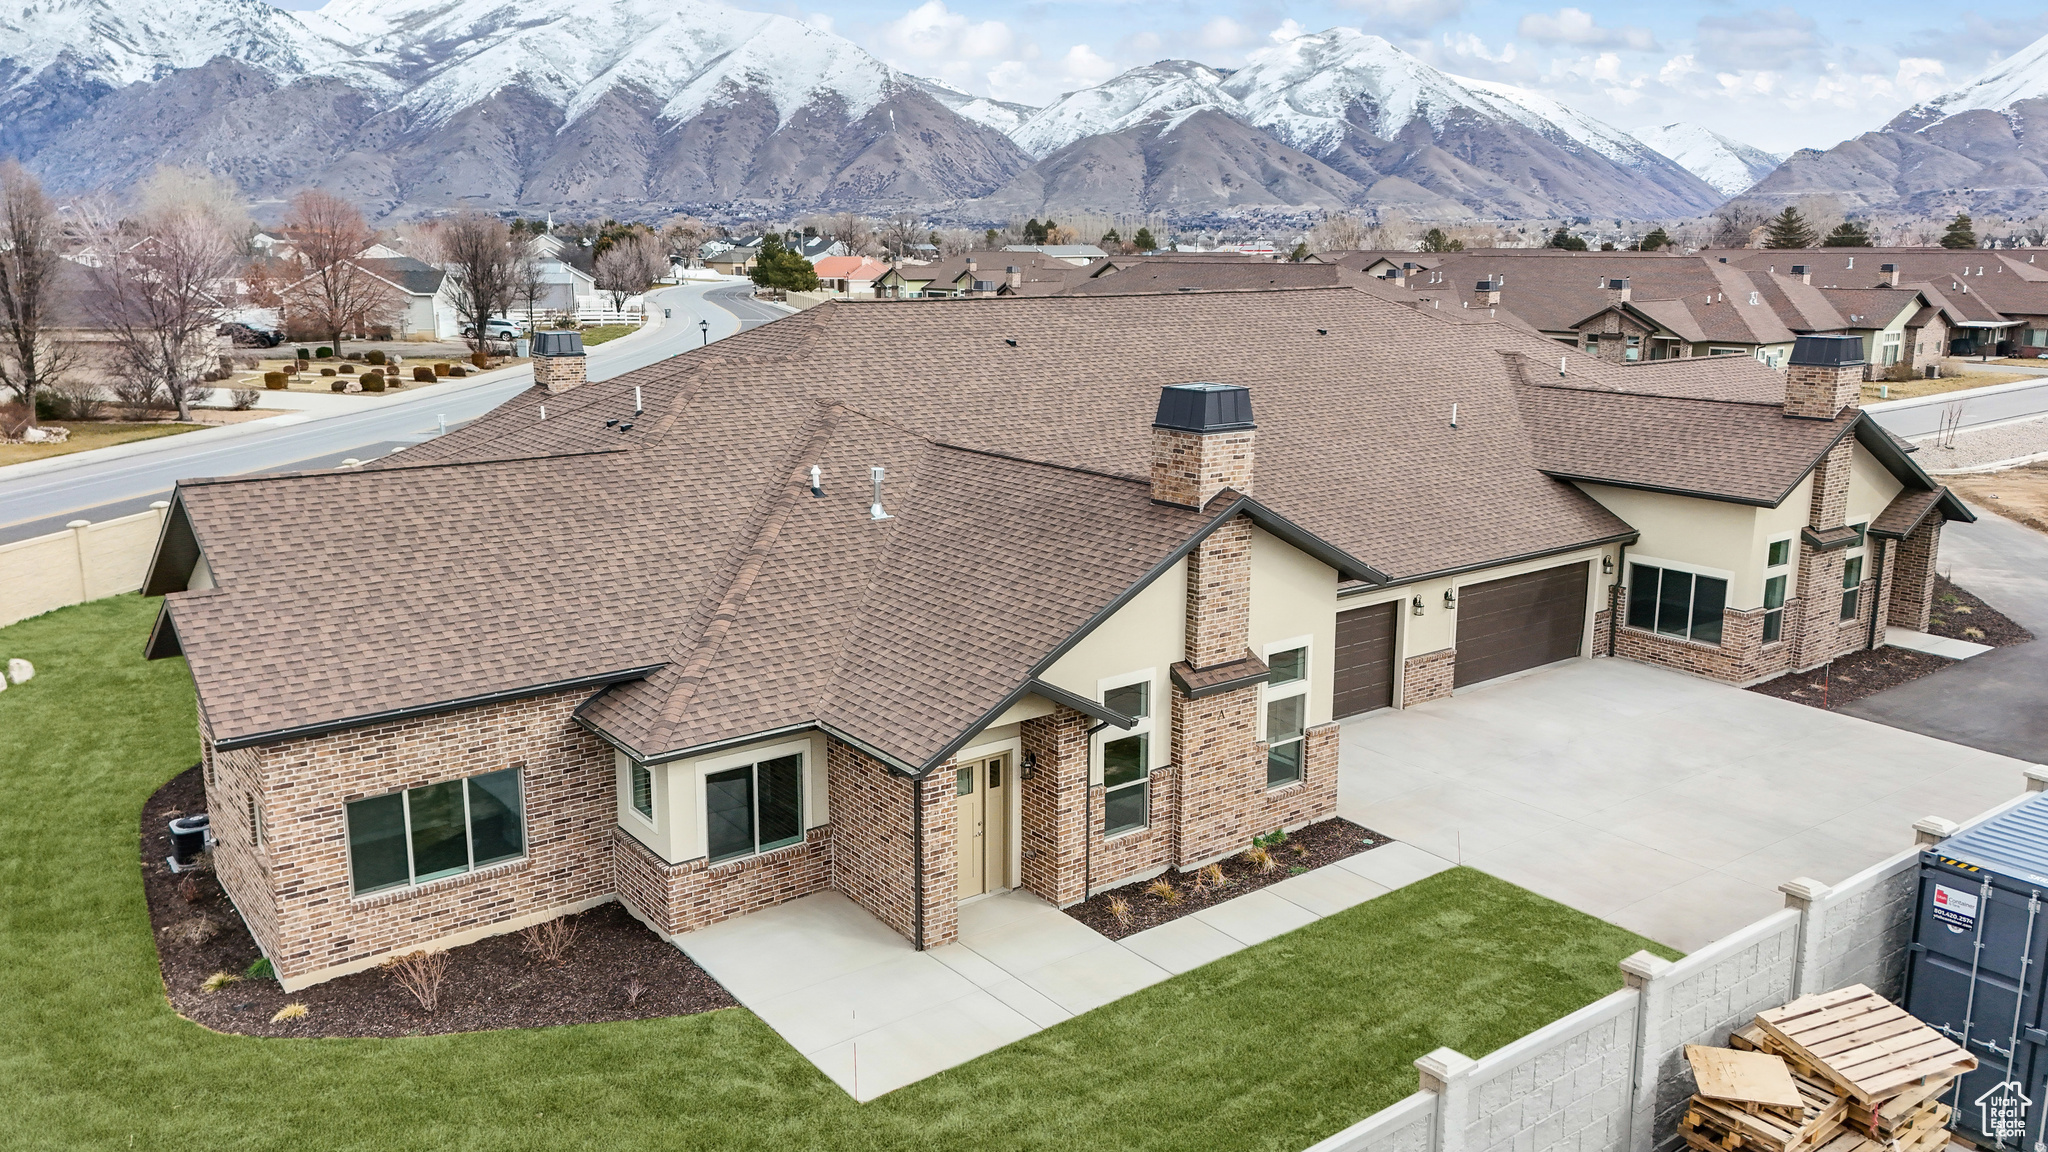 This home is tucked in a quiet corner of the community with additional green space and beautiful mountain views.